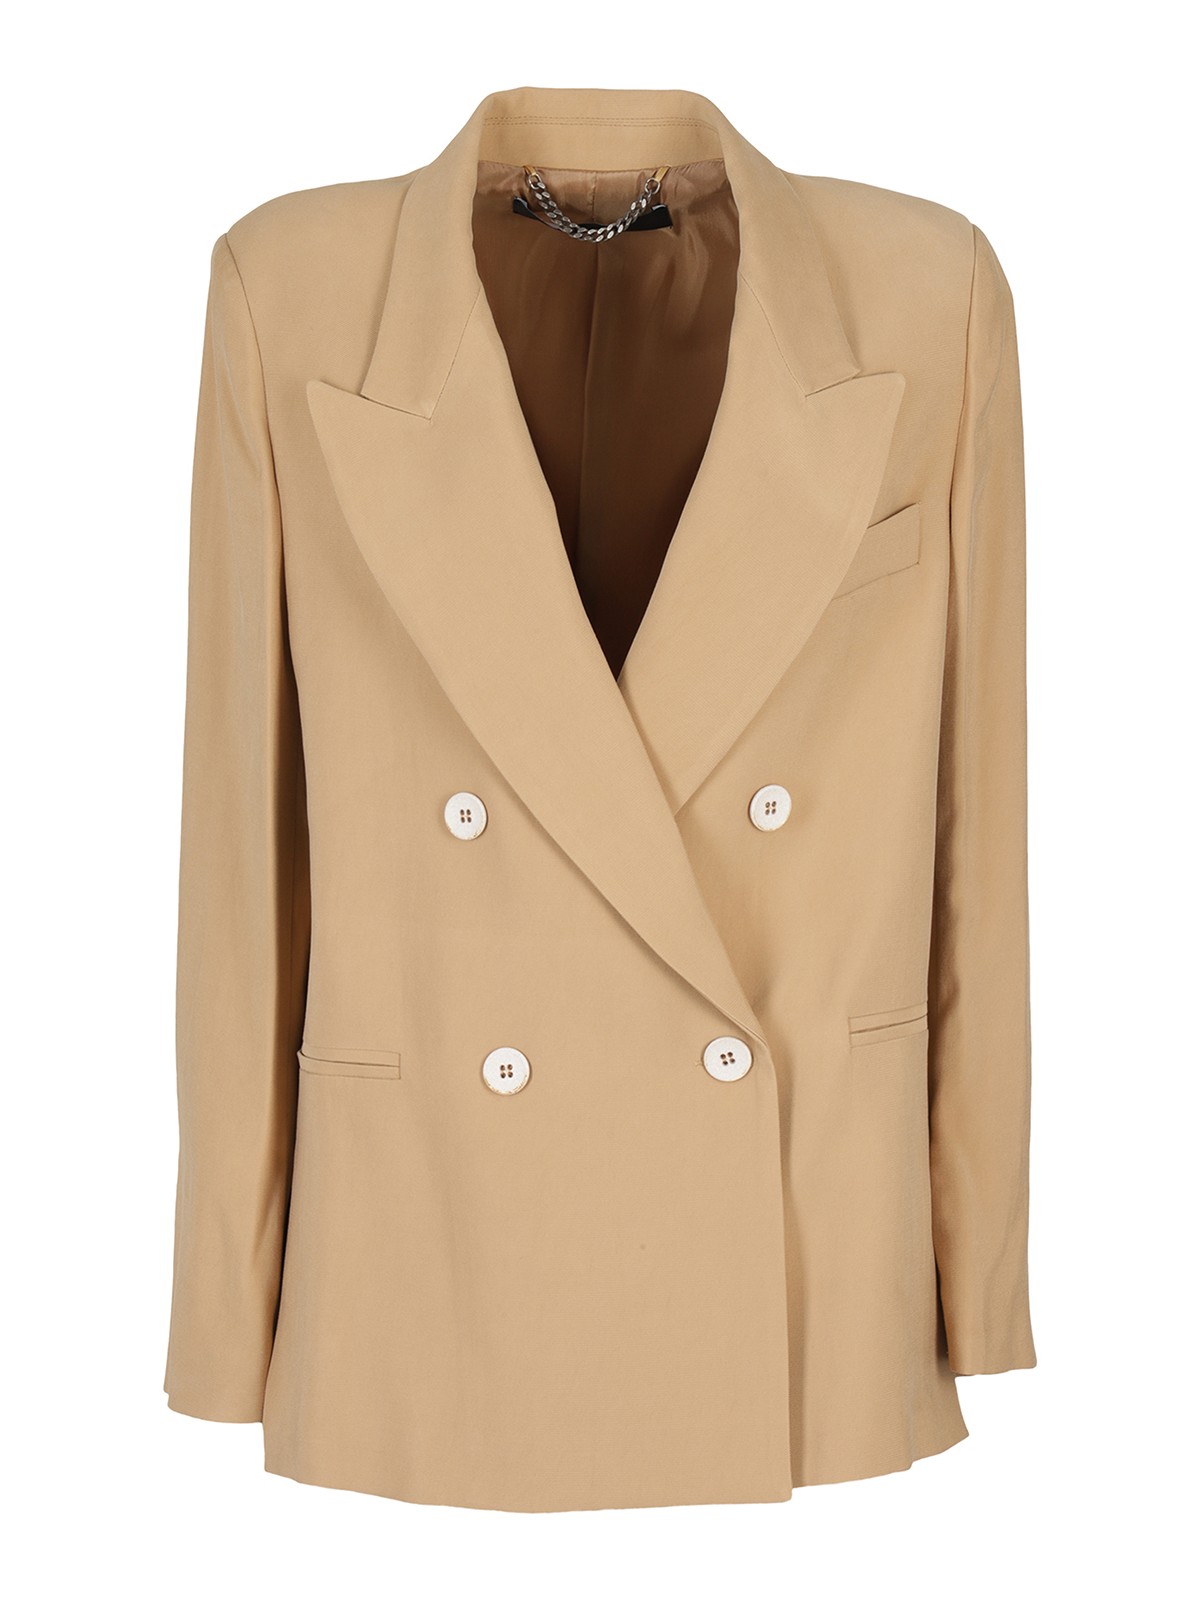 Federica Tosi Jackets DOUBLE-BREASTED BLAZER